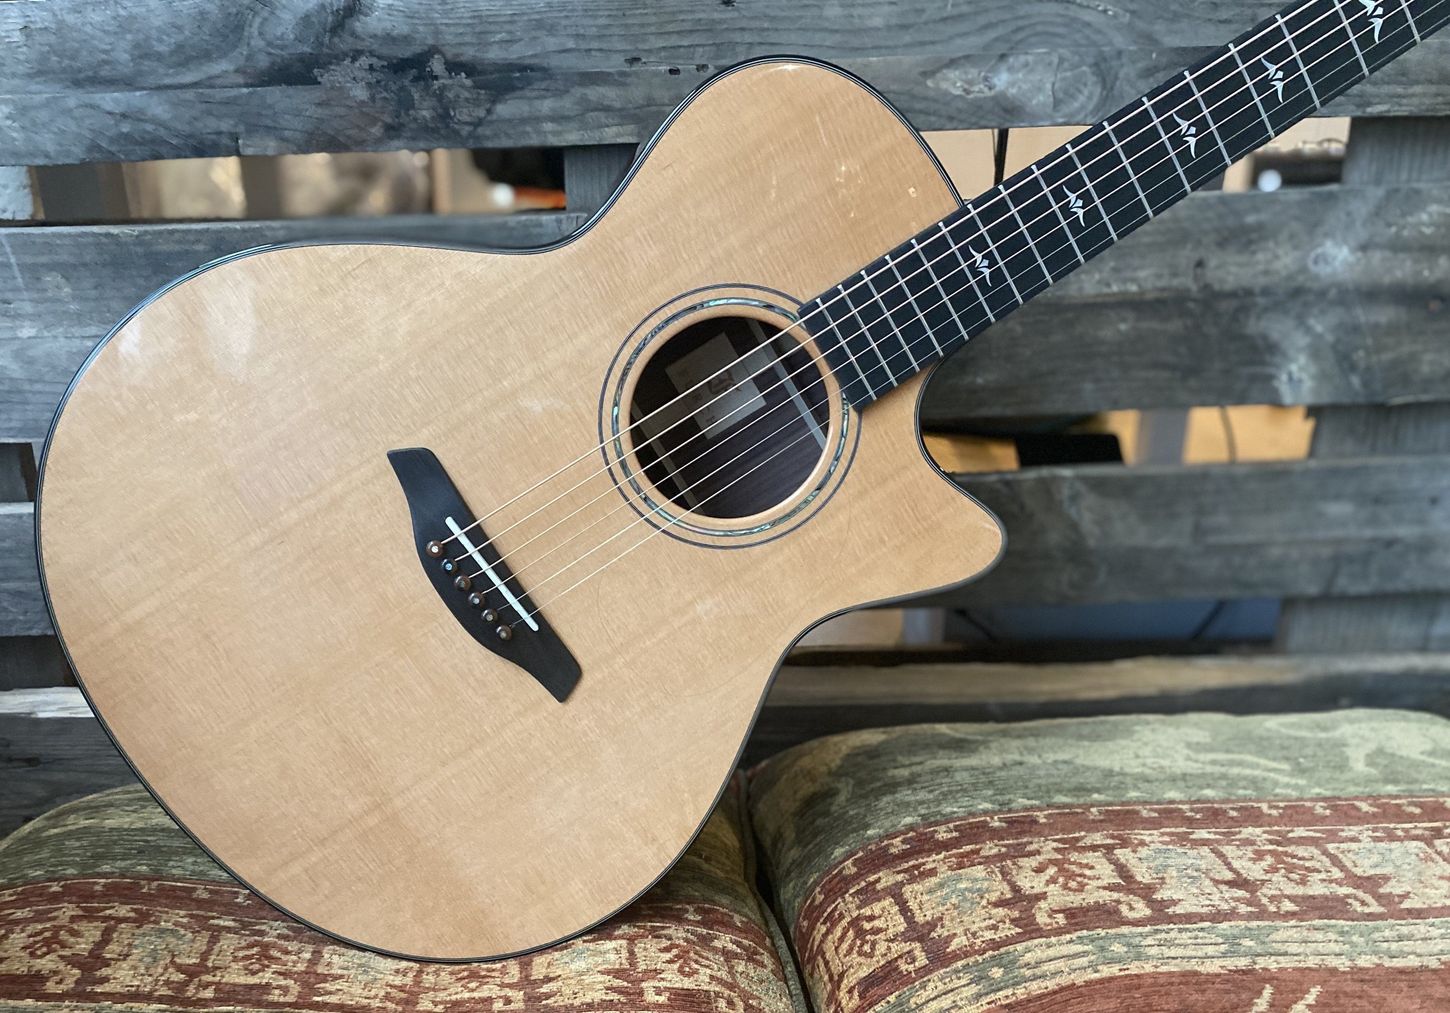 How To Make Acoustic Guitar Sound Better